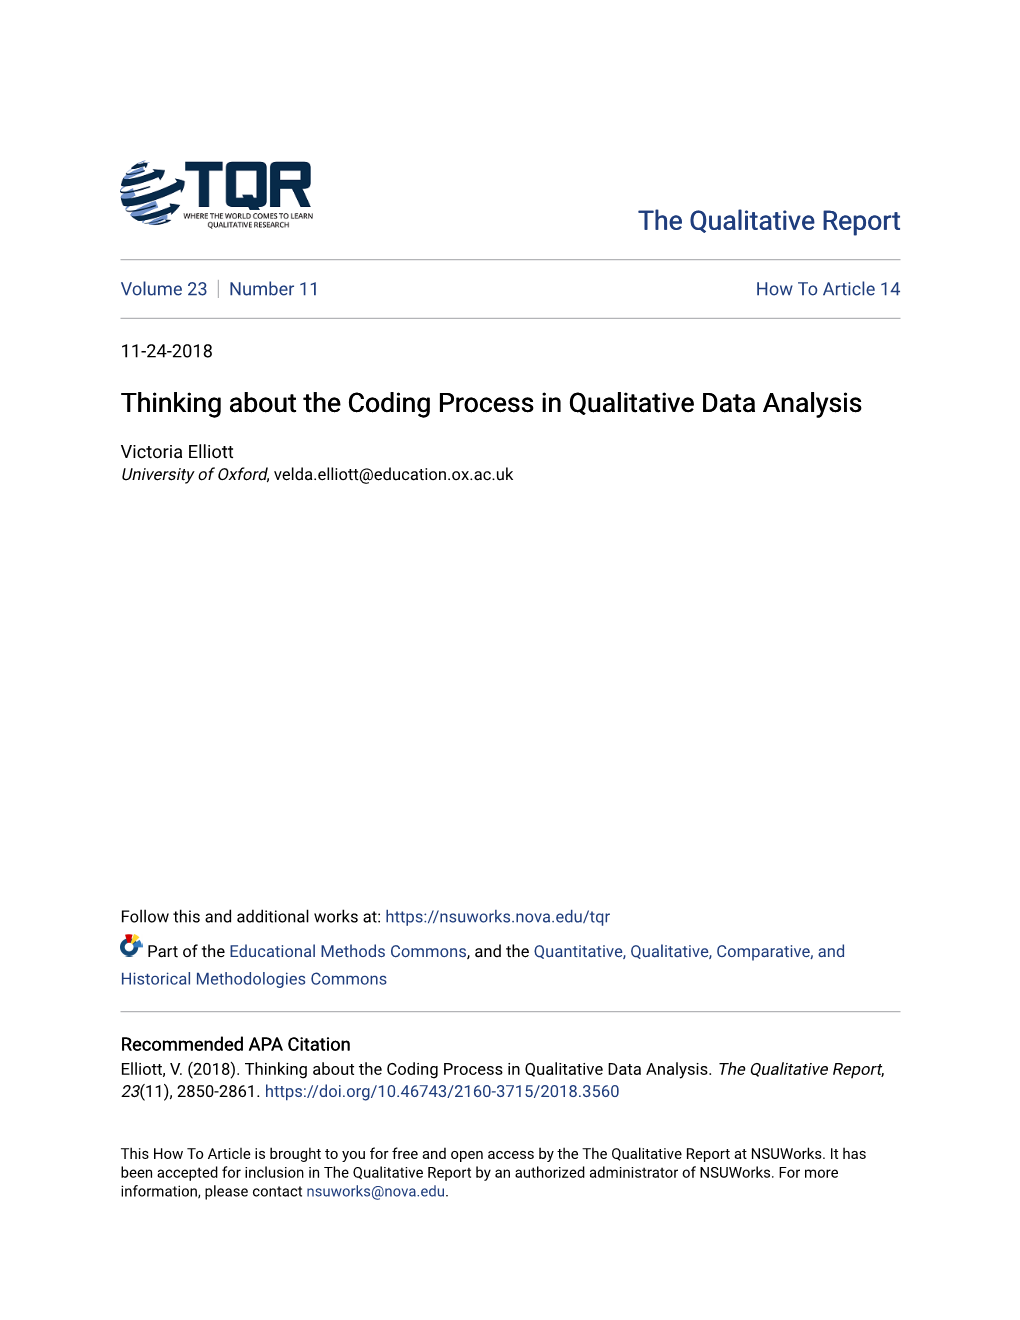 Thinking About the Coding Process in Qualitative Data Analysis